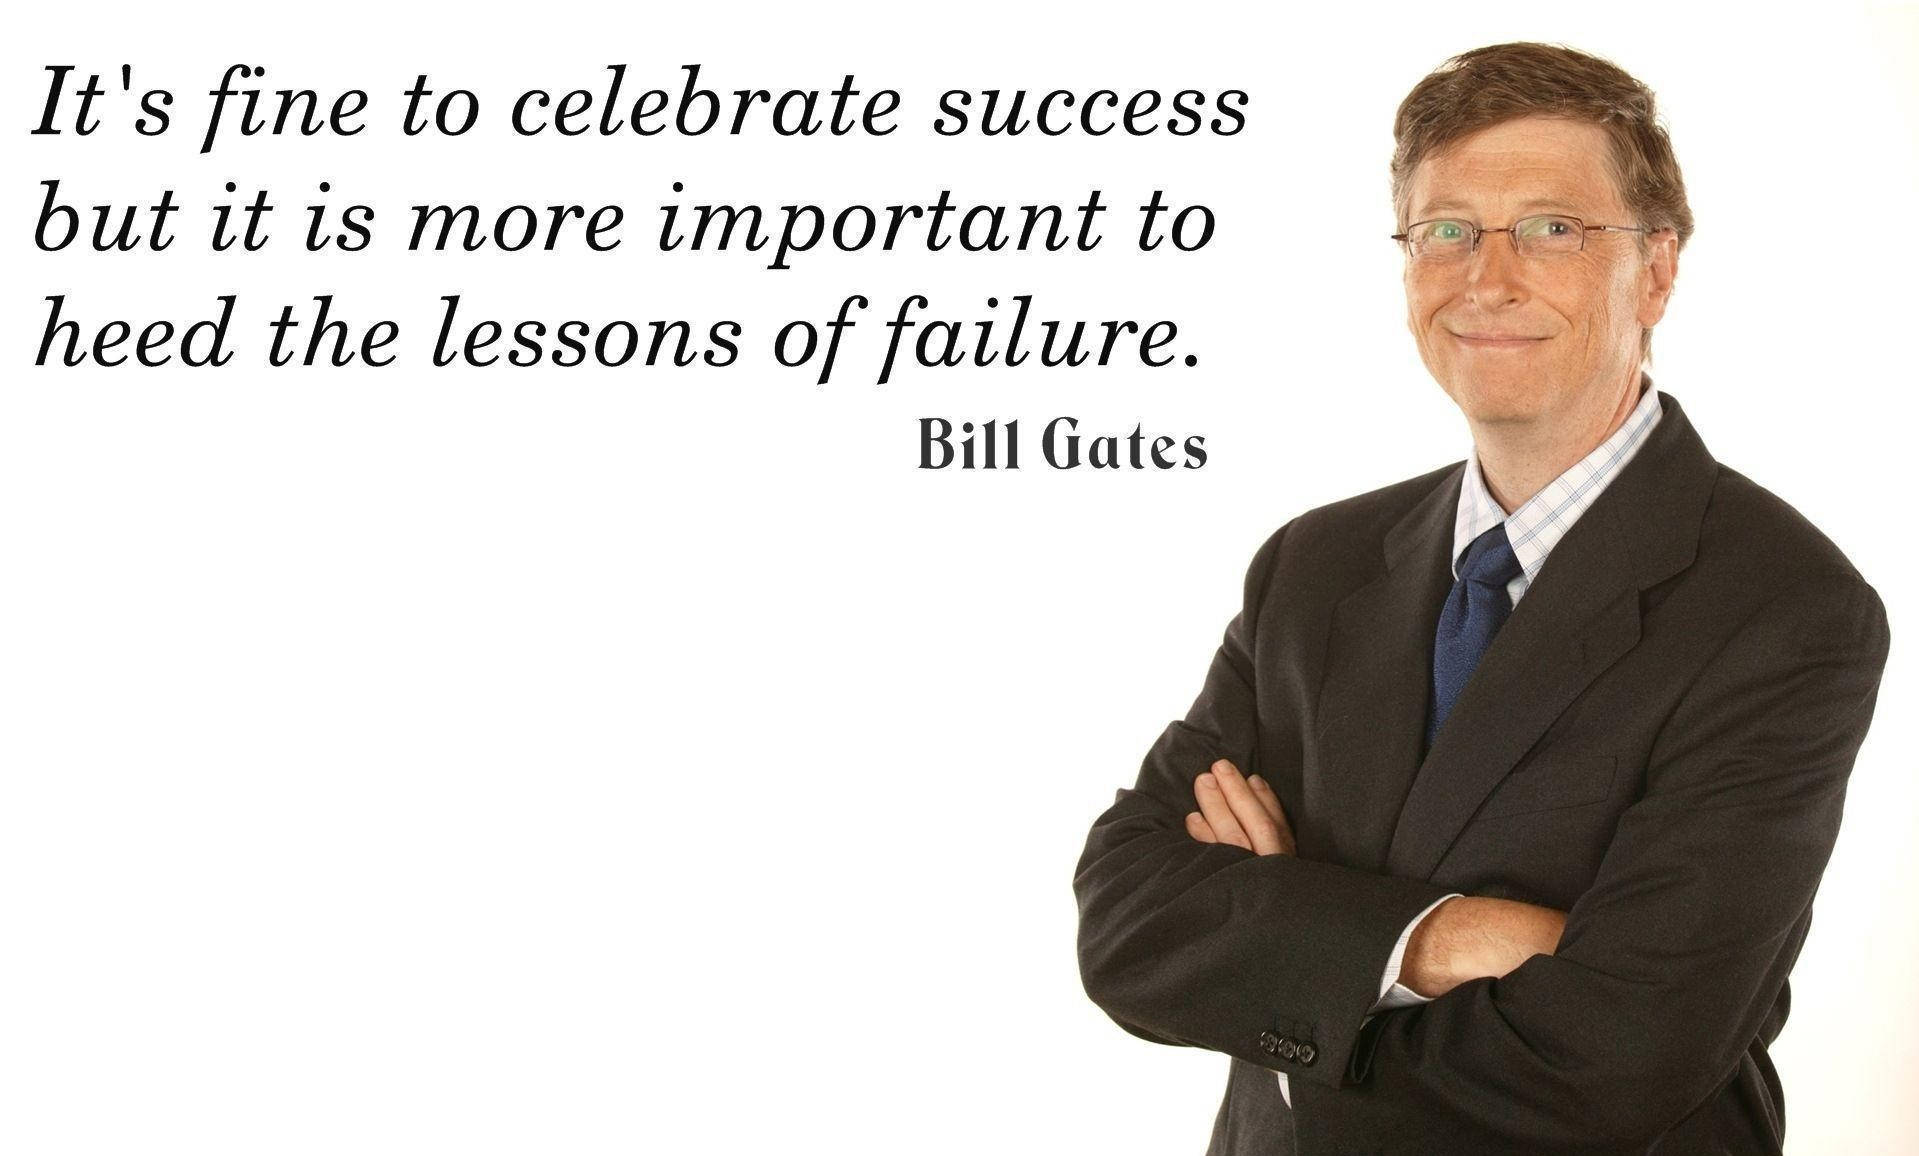 Quote By Bill Gates Wallpaper